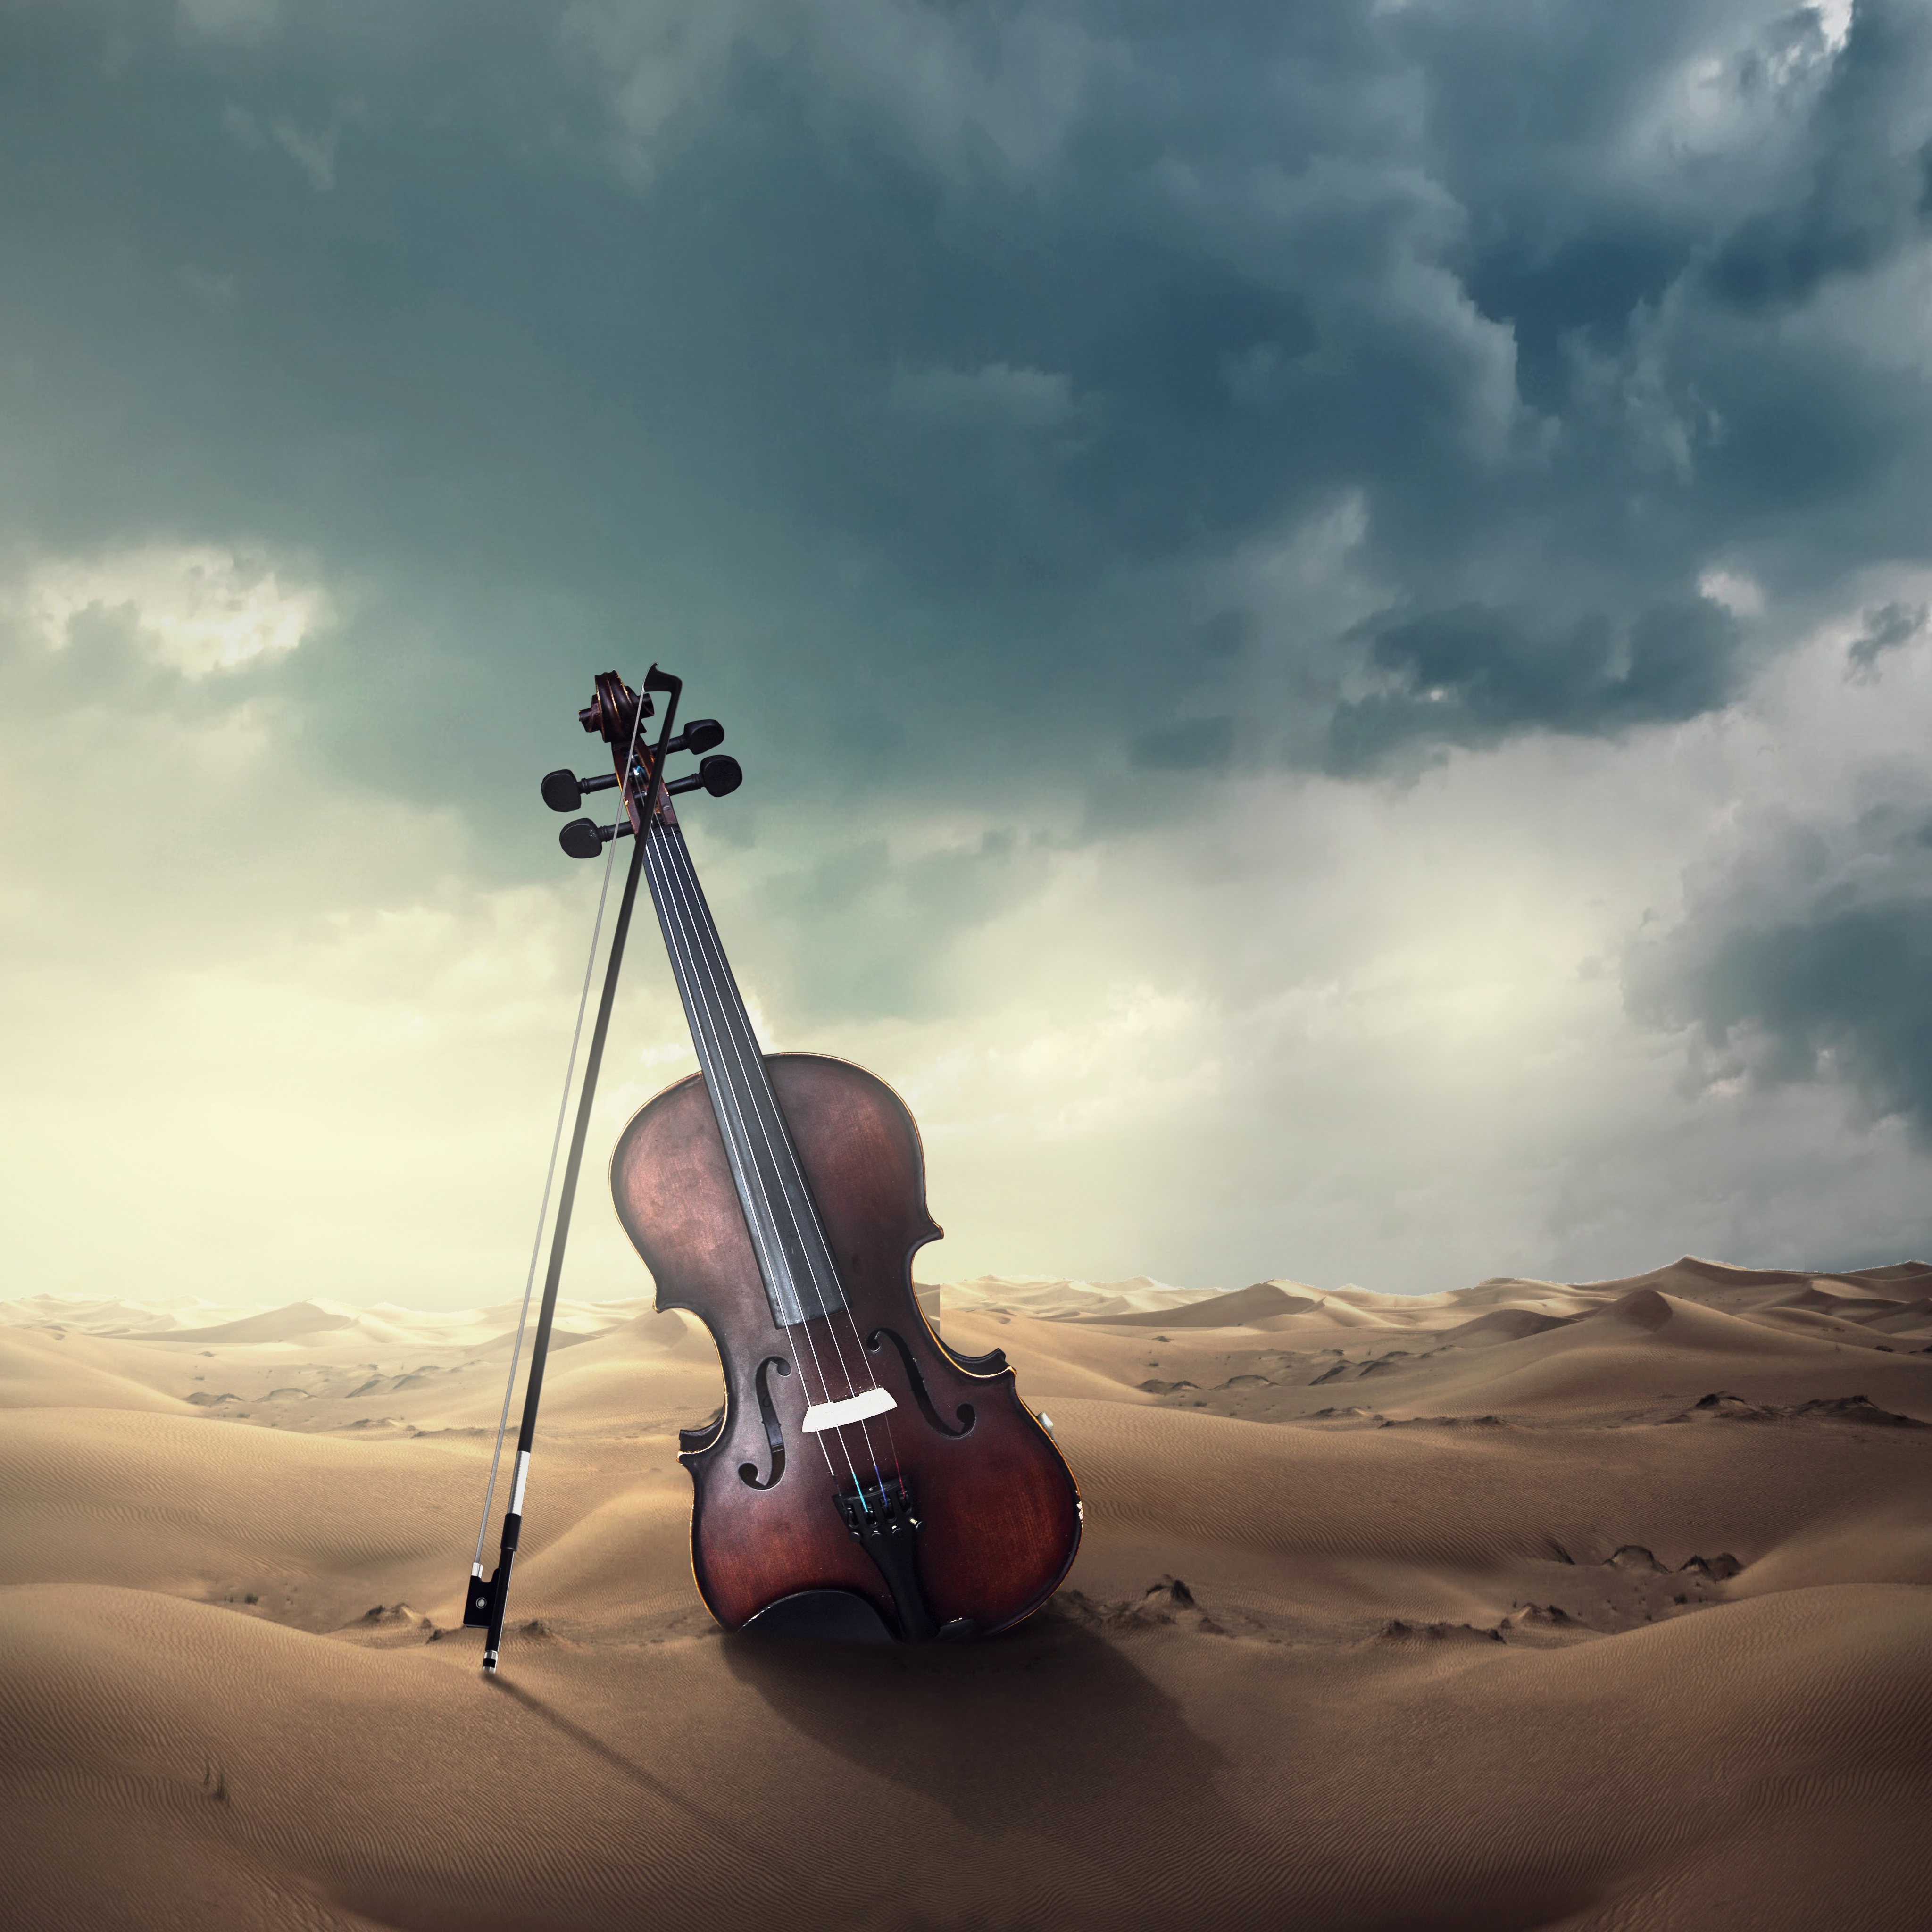 Violin Wallpapers, HD Violin Backgrounds, Free Images Download